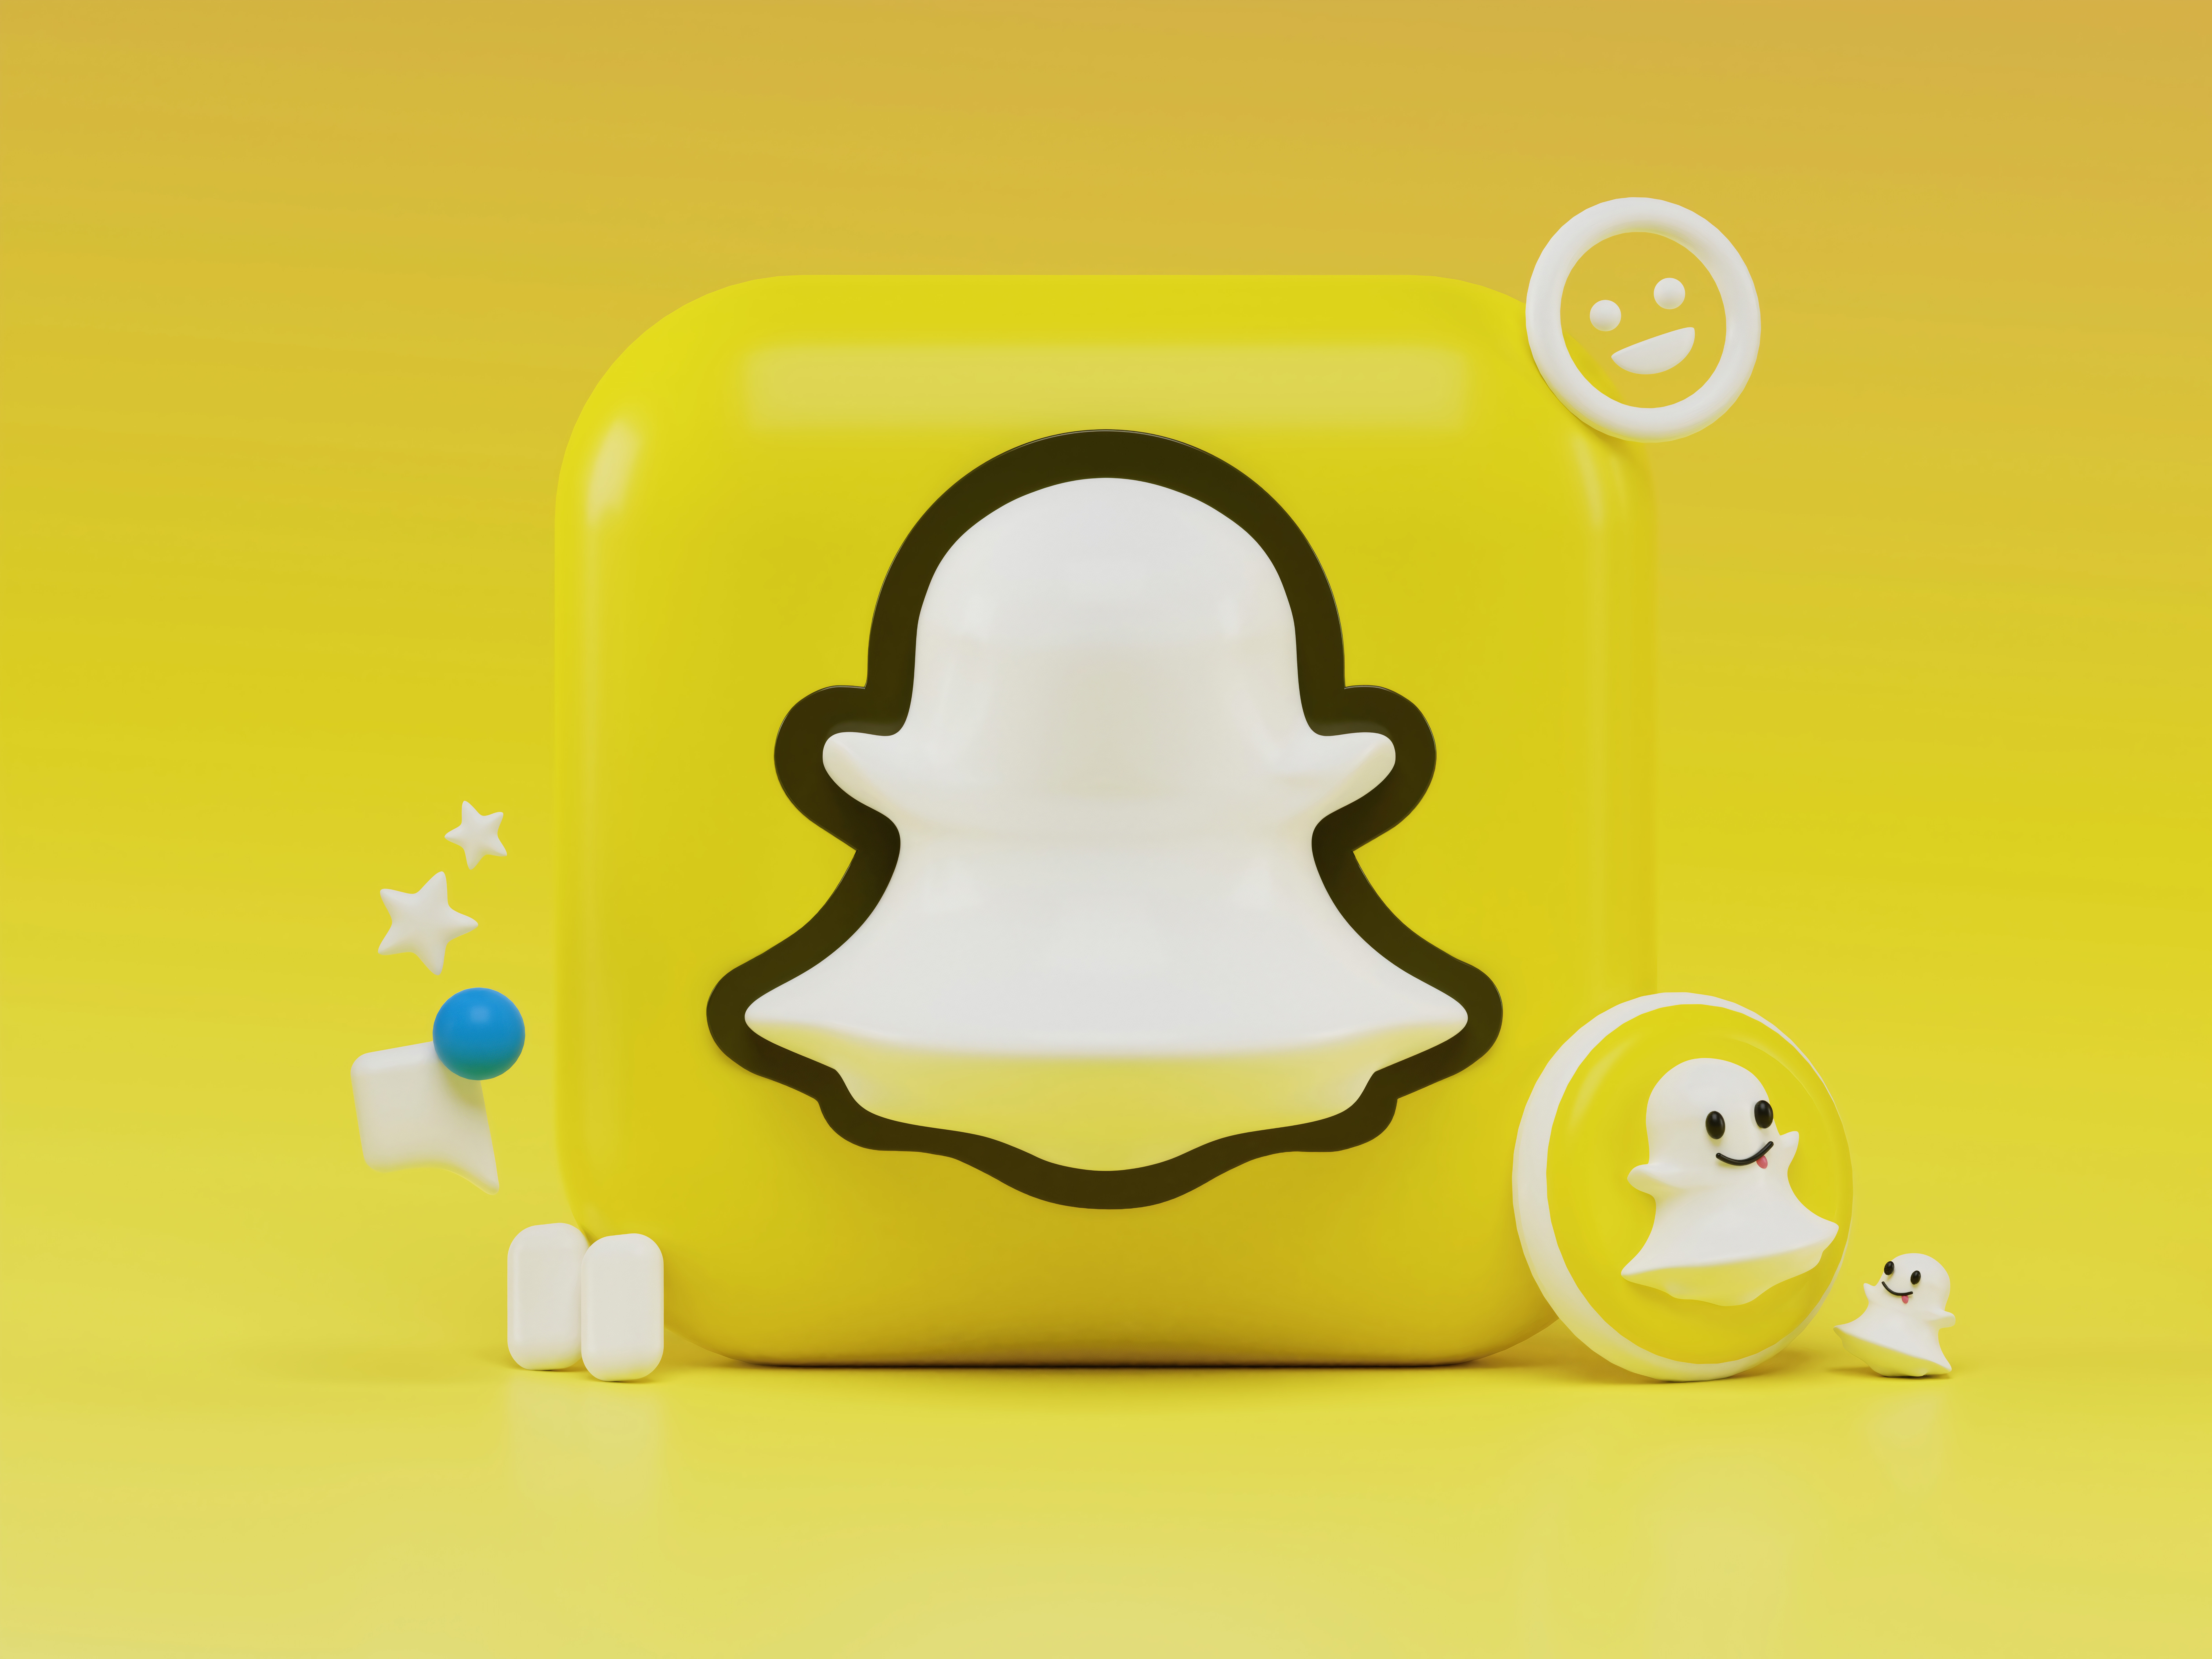 How to change emojis on Snap on Android and iOS in a few steps